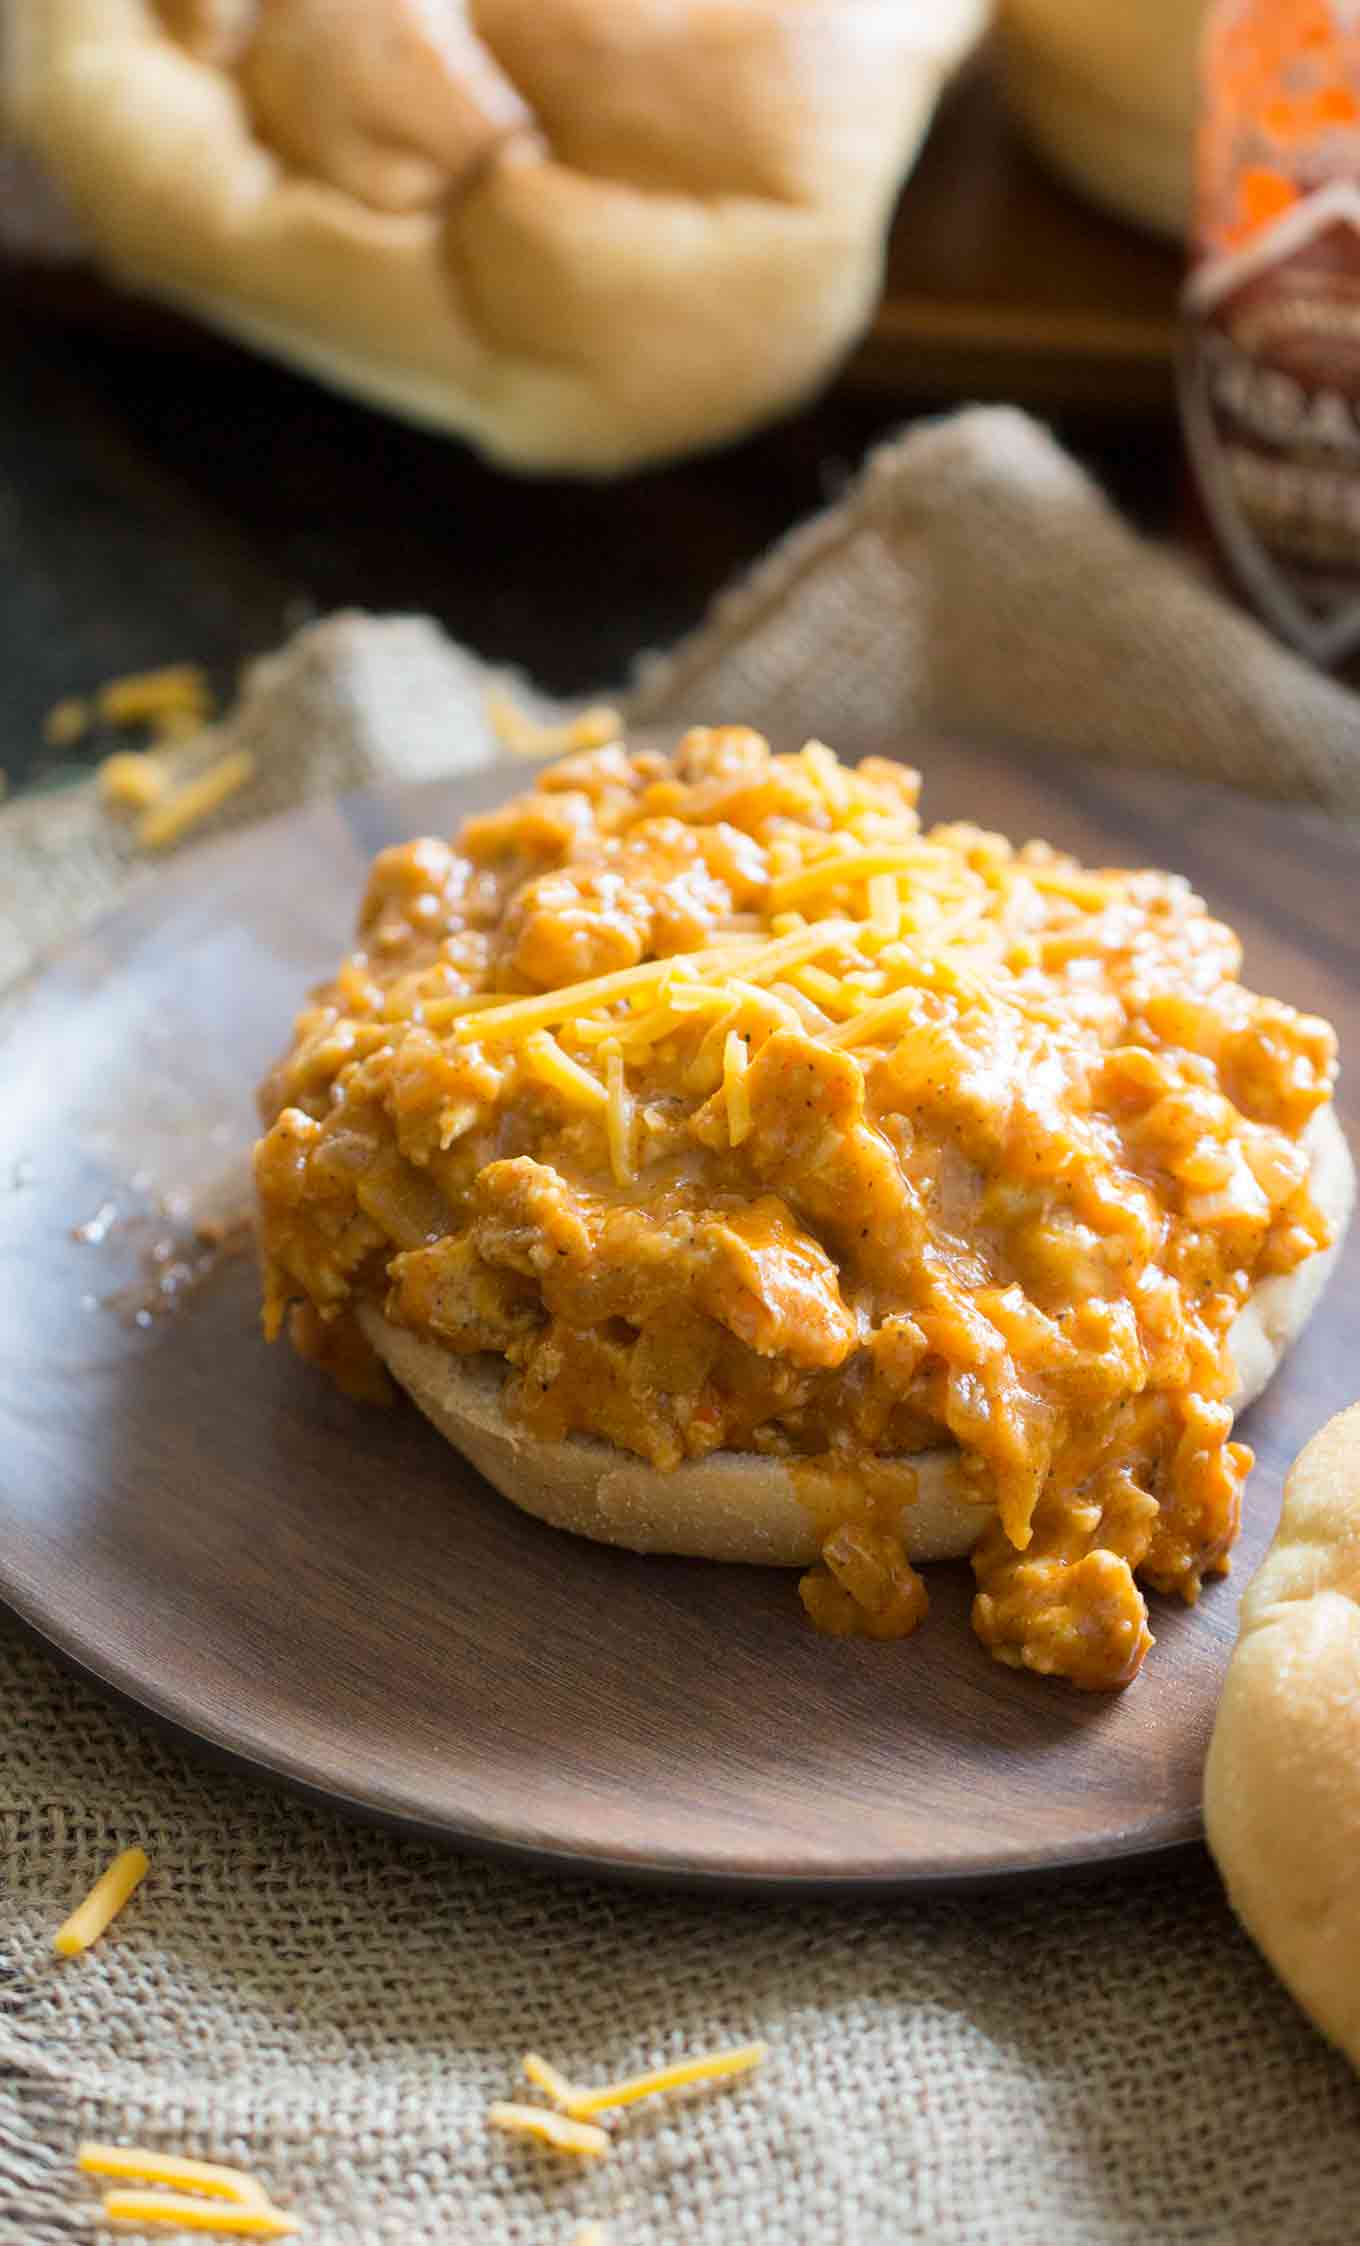 Buffalo Chicken Sloppy Joes made with just a few ingredients in one pan in just 30 minutes, are cheesy and perfectly hot.